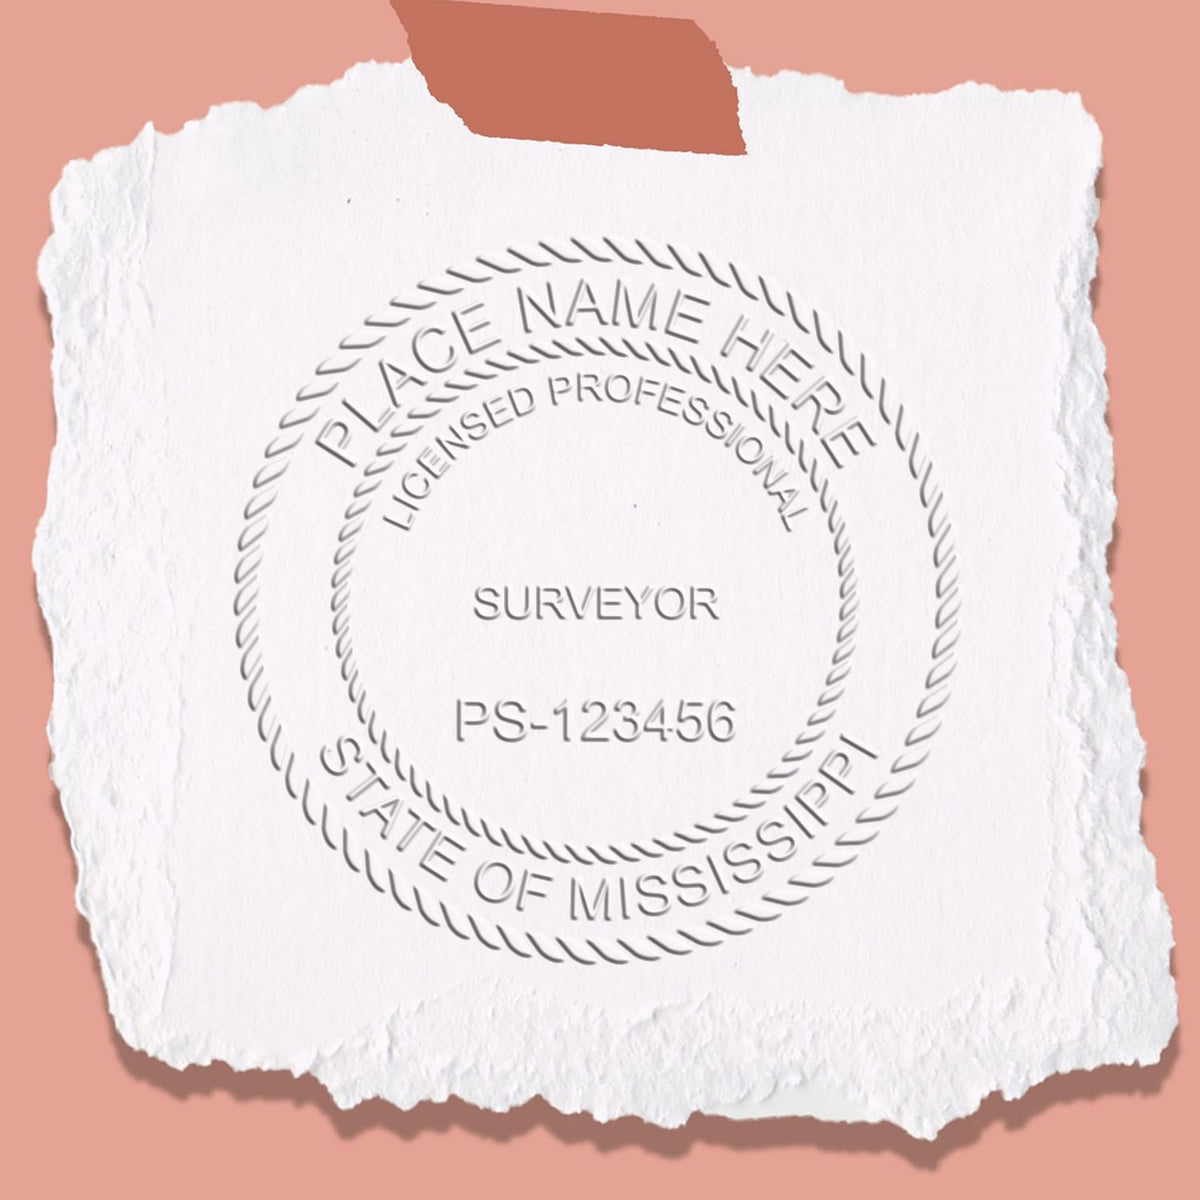 A stamped impression of the Handheld Mississippi Land Surveyor Seal in this stylish lifestyle photo, setting the tone for a unique and personalized product.